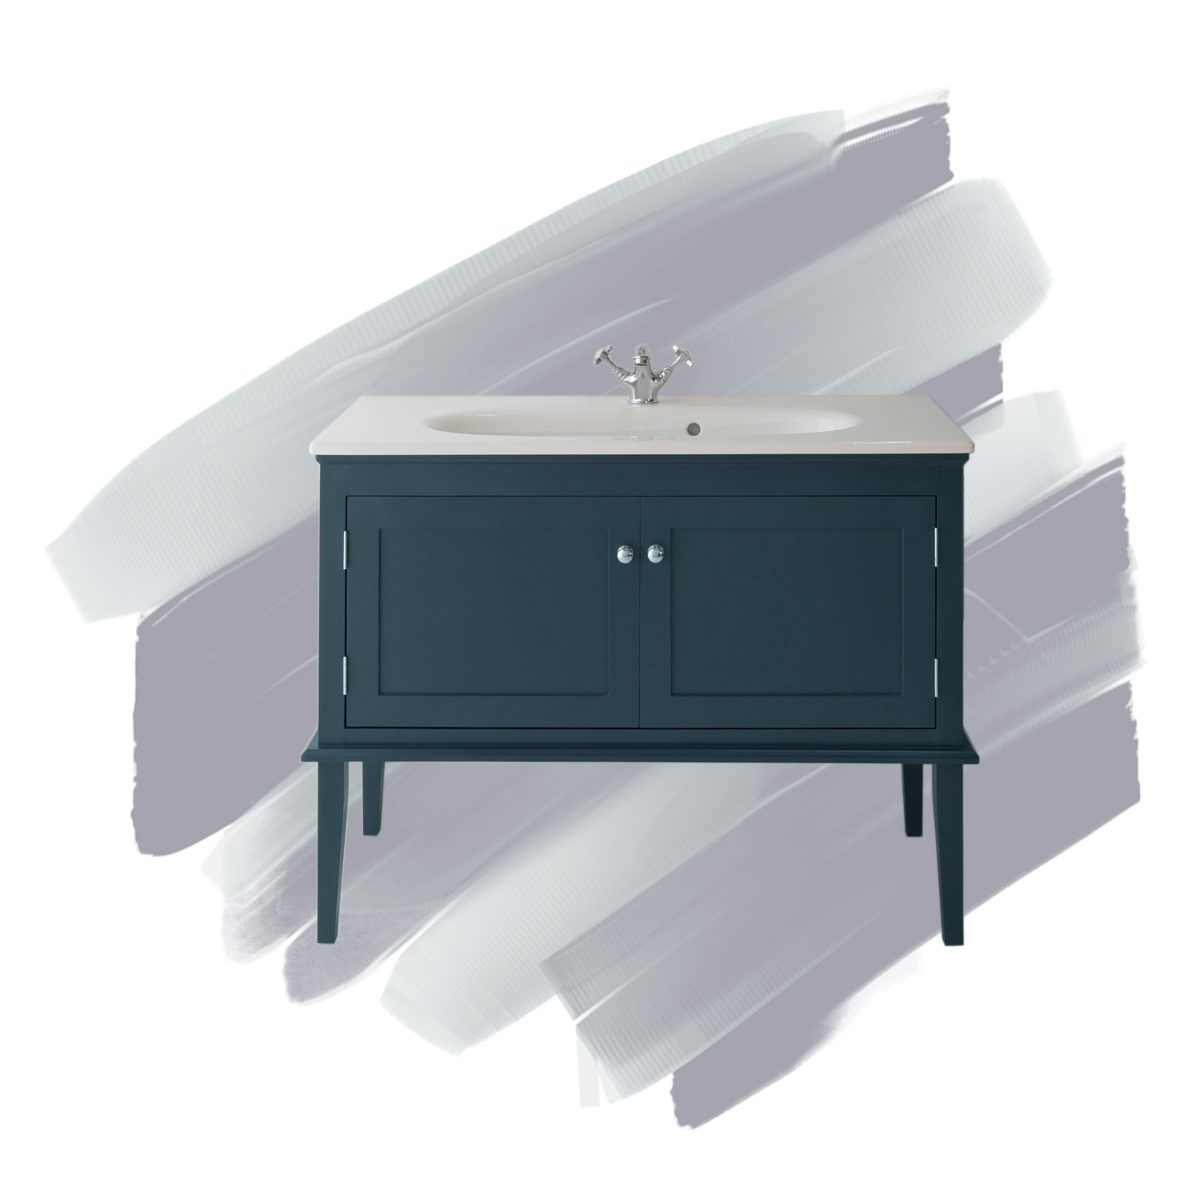 Hamar Basin and Vanity Unit in a teal blue.